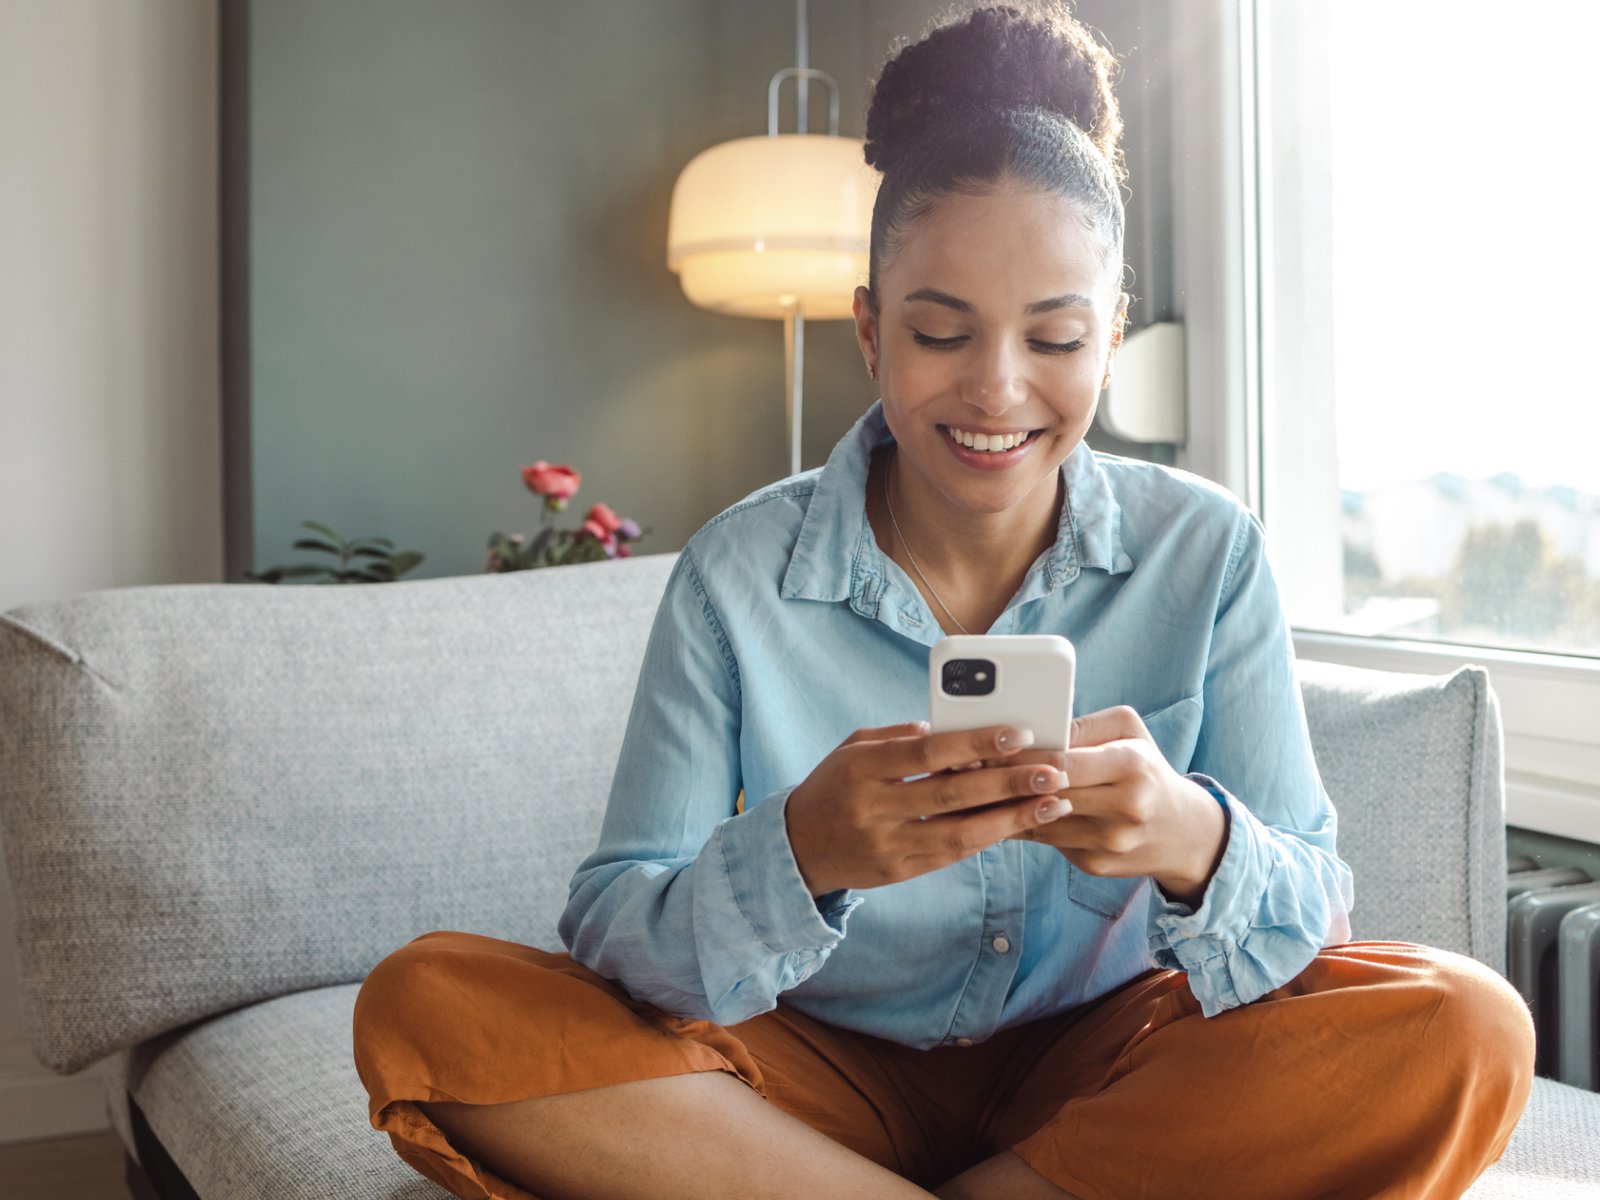 woman sitting on a couch looking at her phone smiling